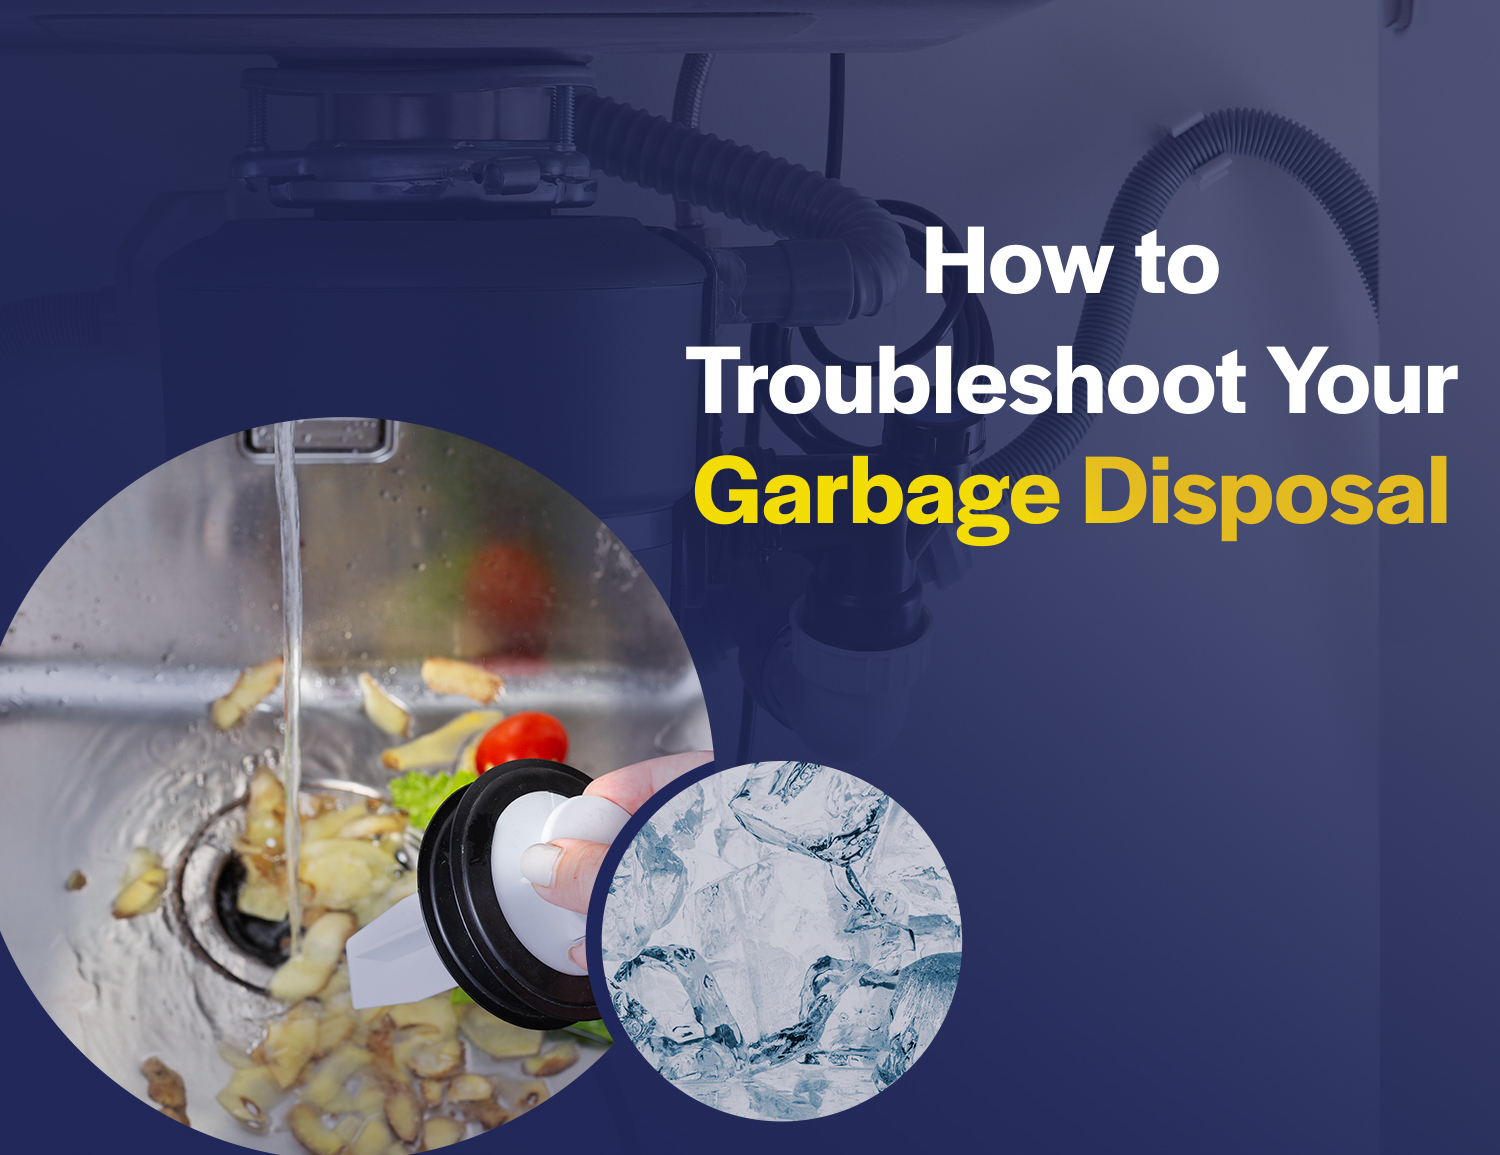 How to troubleshoot your garbage disposal